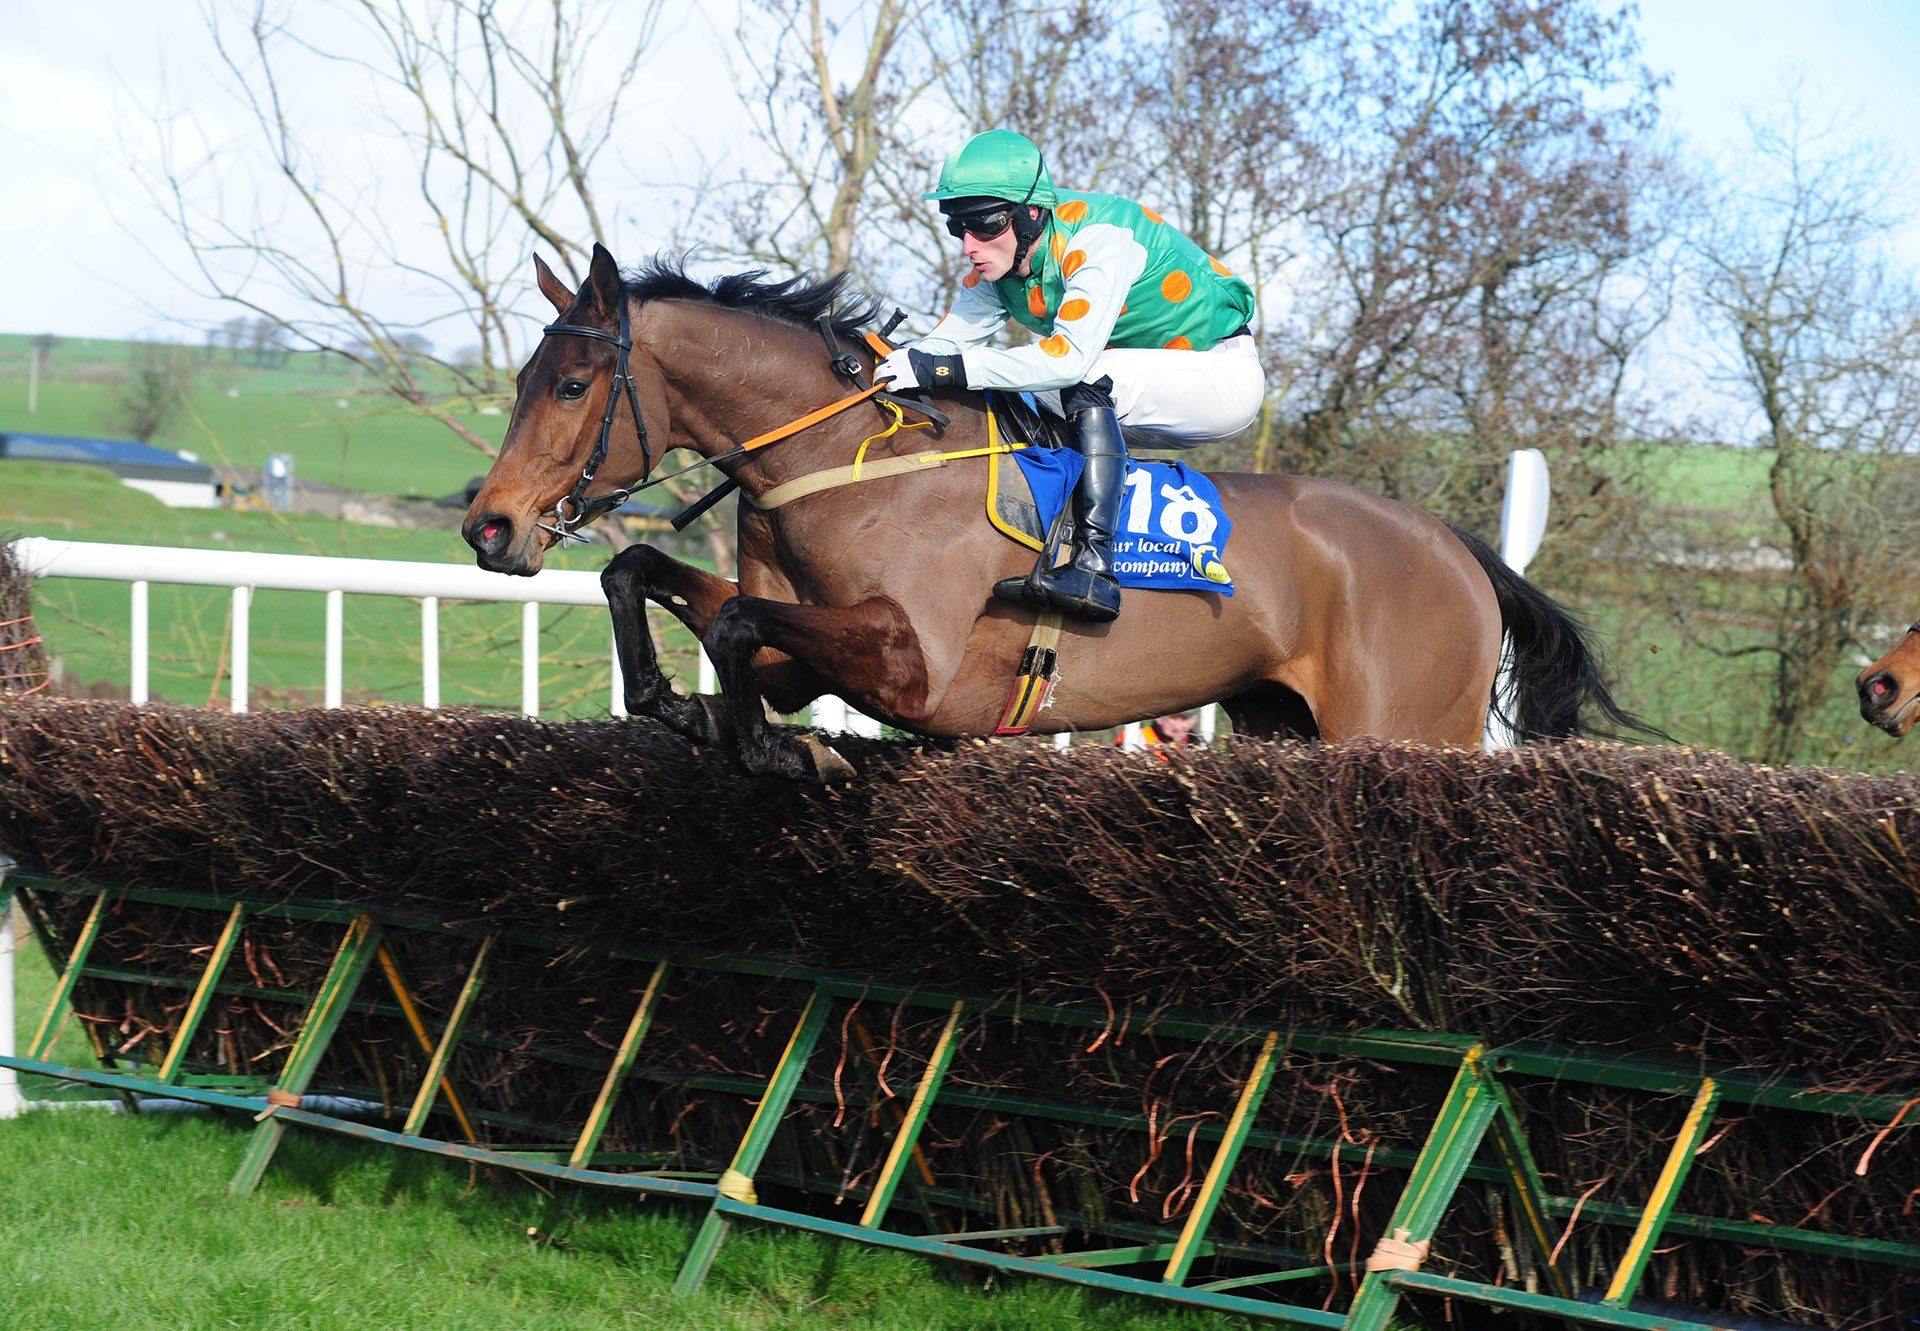 Deploy The Getaway (Getaway) winning a 4yo maiden point-to-point at Tallow